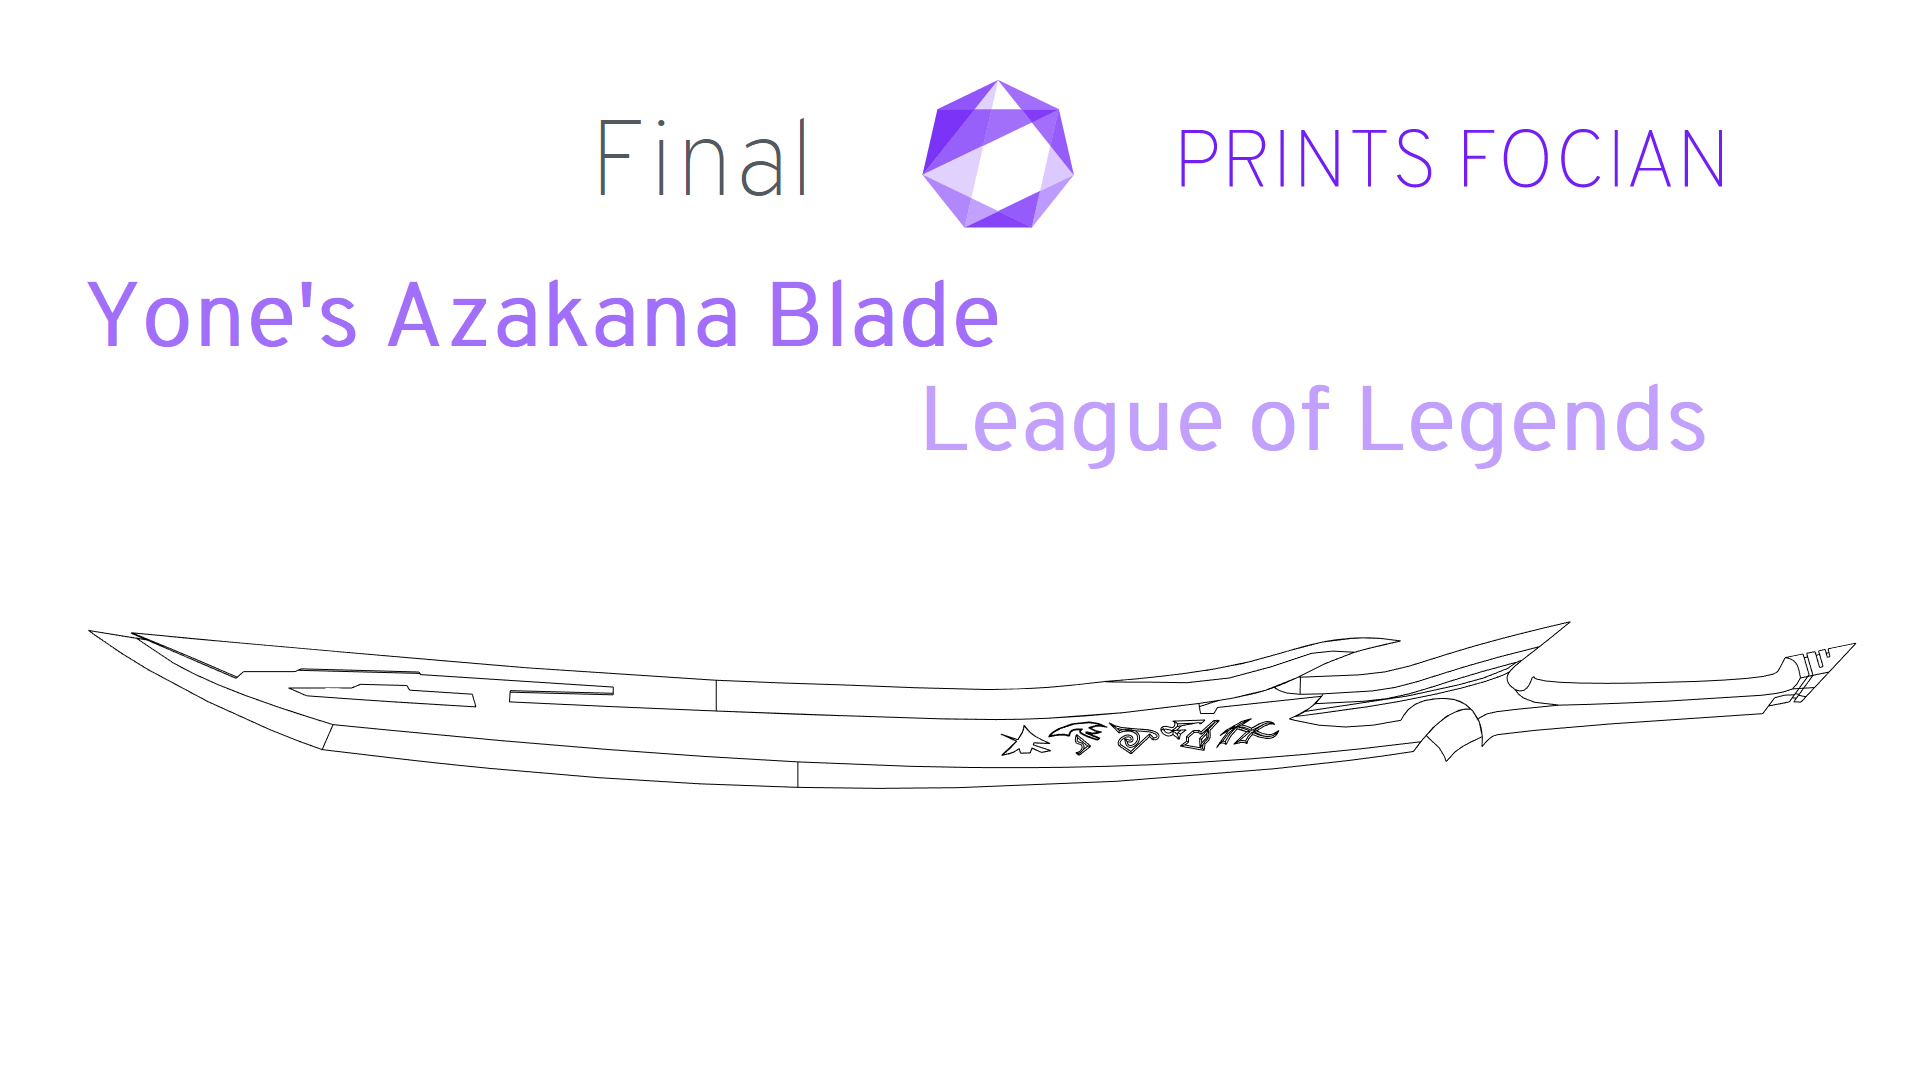 Wireframe image of Yones Azakana Sword on a white background. Prints Focian Icon top and central. Text: Purple Prints Focian, Yones Azakana Blade and League of Legends. Dark grey text reads Final